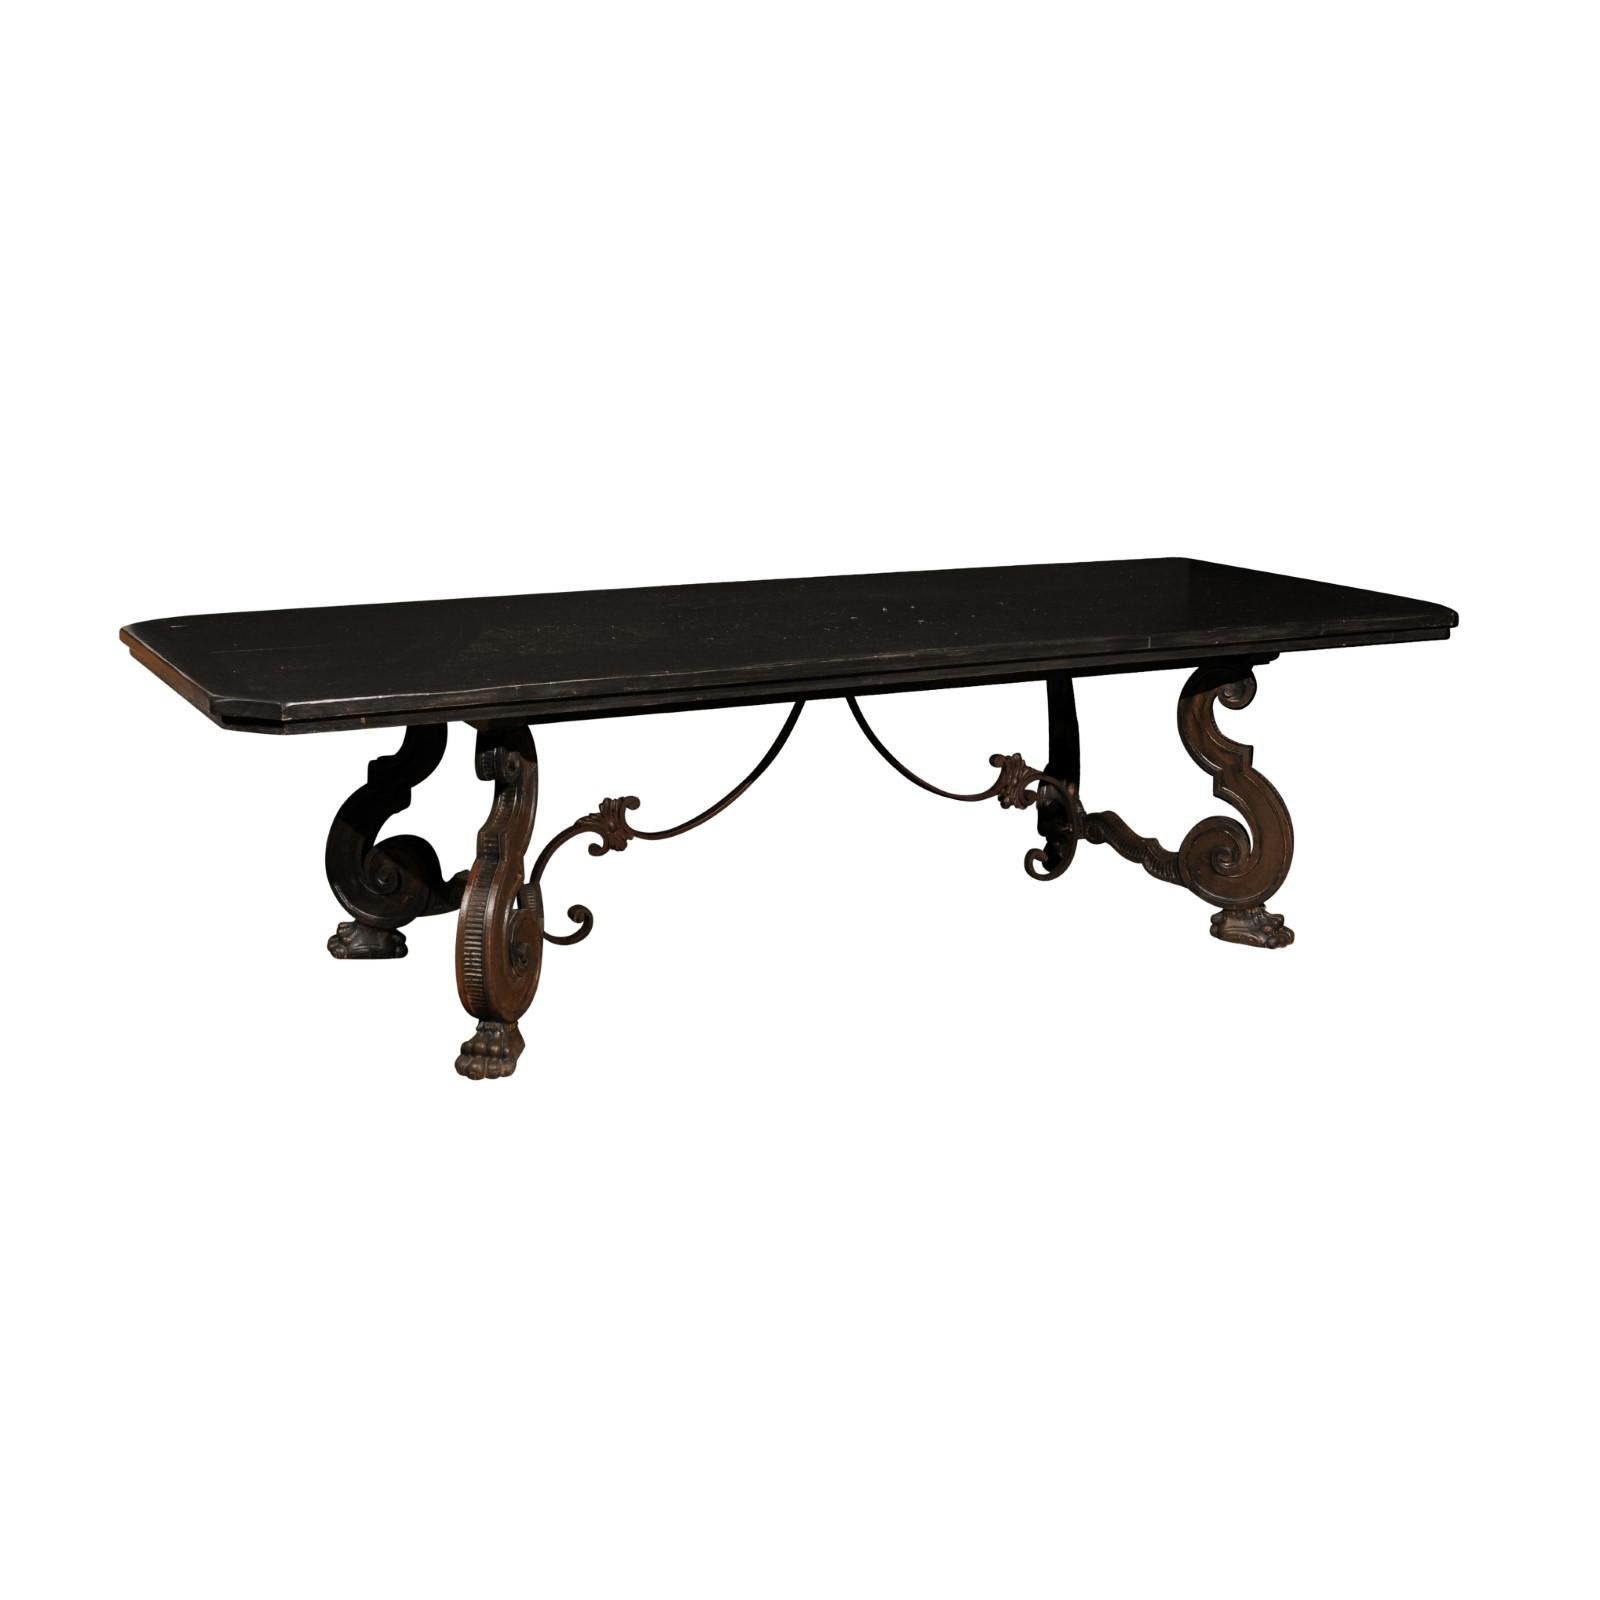 Italian 1920s walnut dining room table with bold ebonized finish, carved S-Scroll legs on paw feet. Immerse yourself in the grandeur of the 1920s with this Italian dining table, a statement piece that marries bold aesthetics with traditional